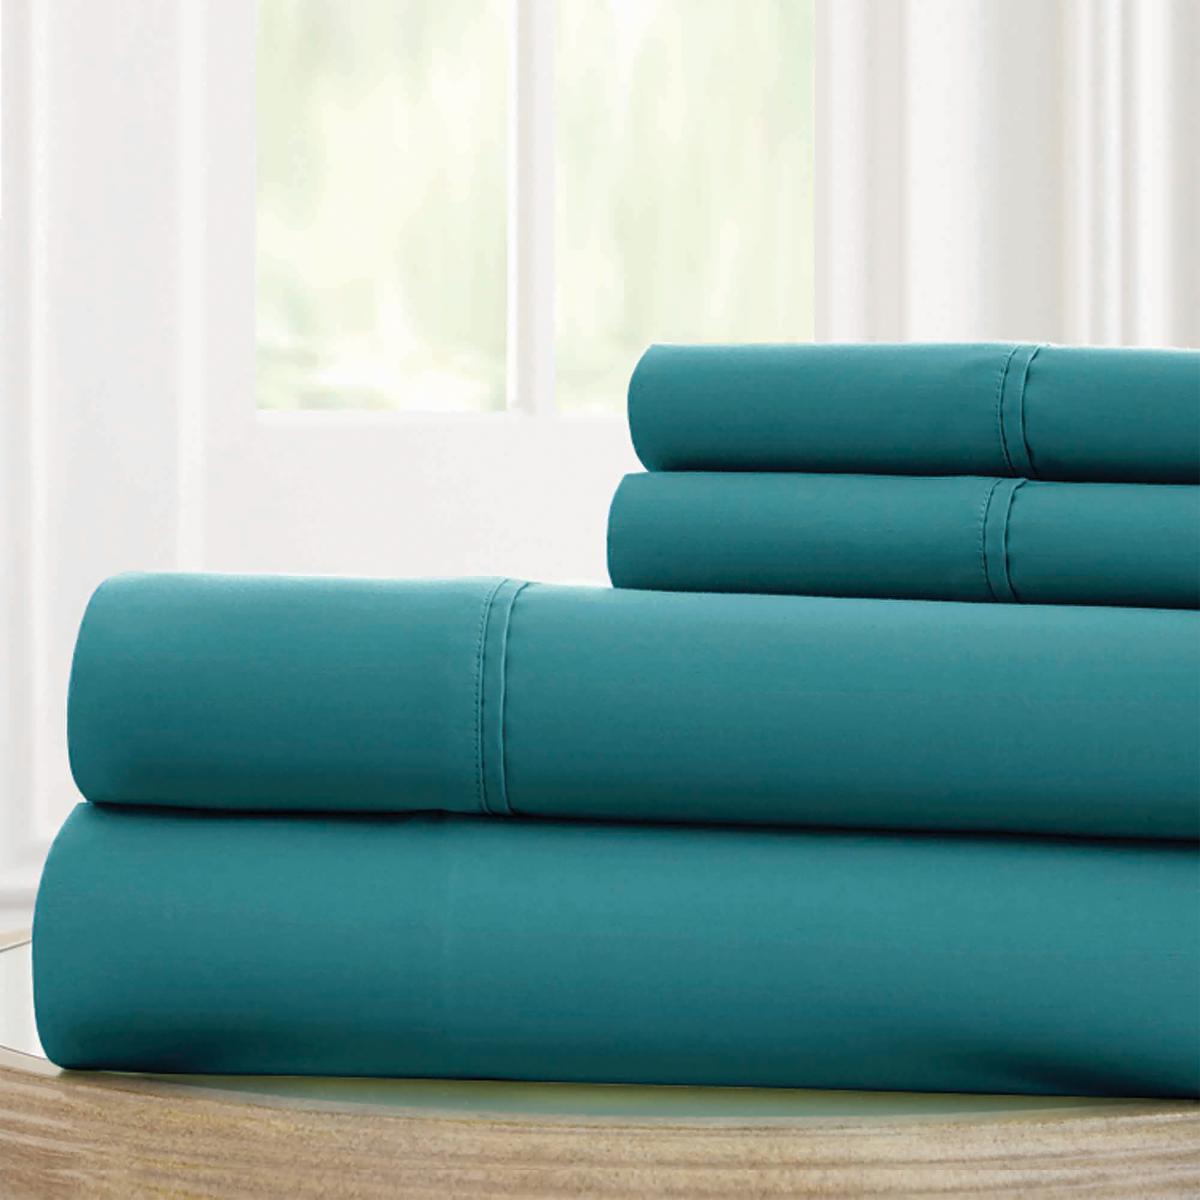 Bezons 4 Piece King Size Microfiber Sheet Set with 1800 Thread Count, Teal Blue - BM202322